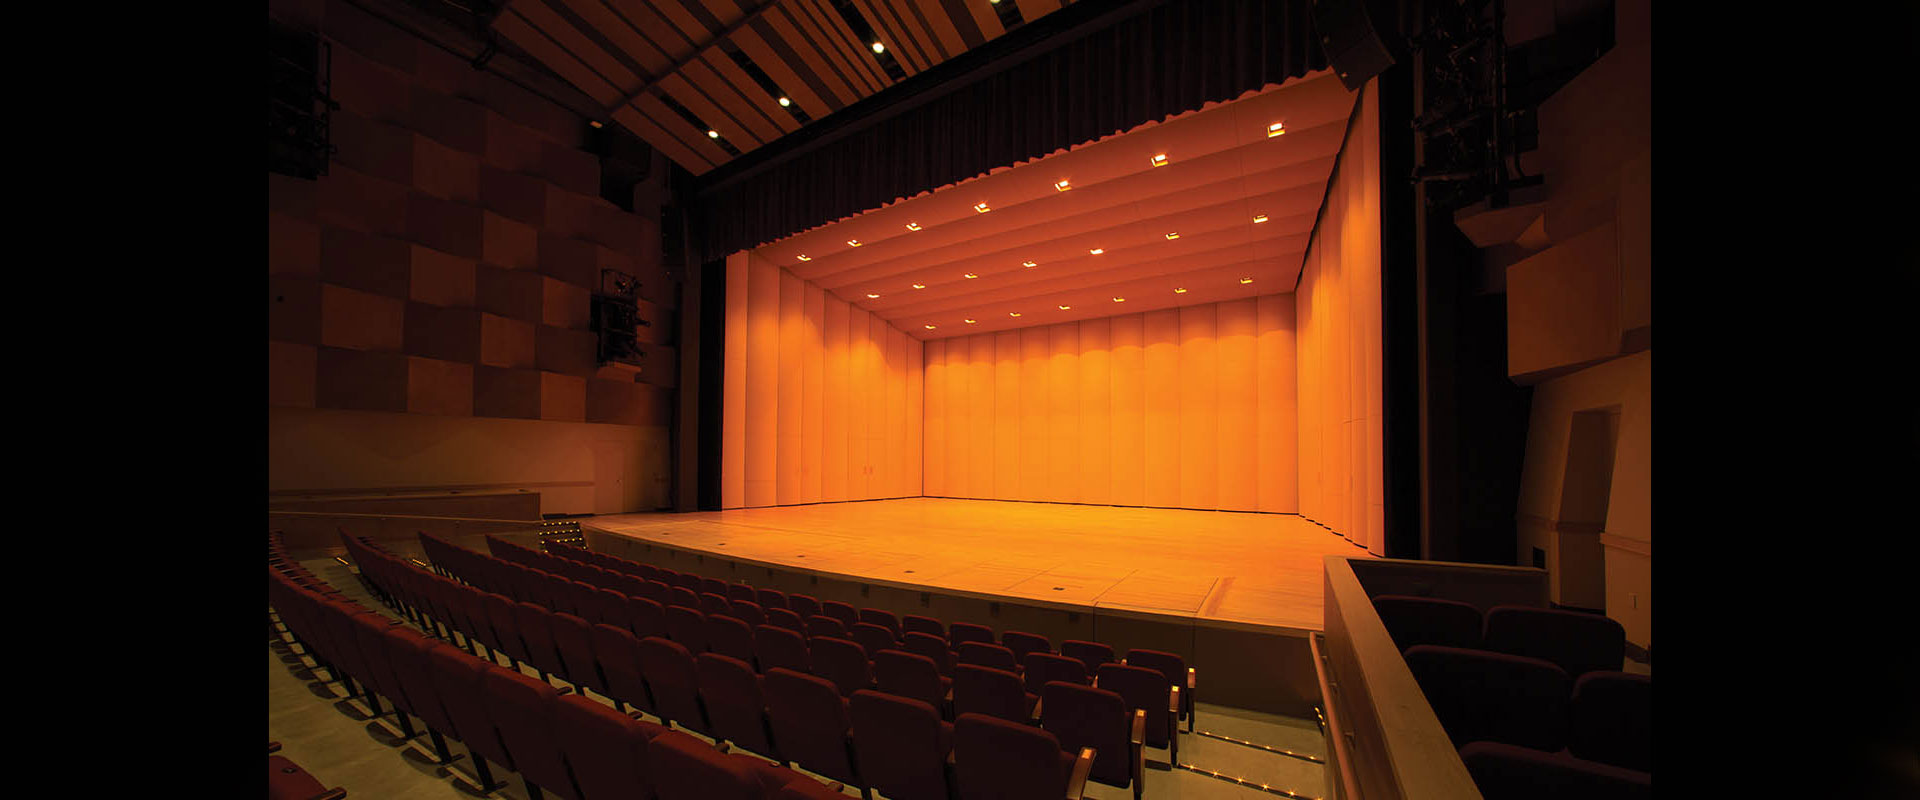 Schrott Center For The Arts Seating Chart